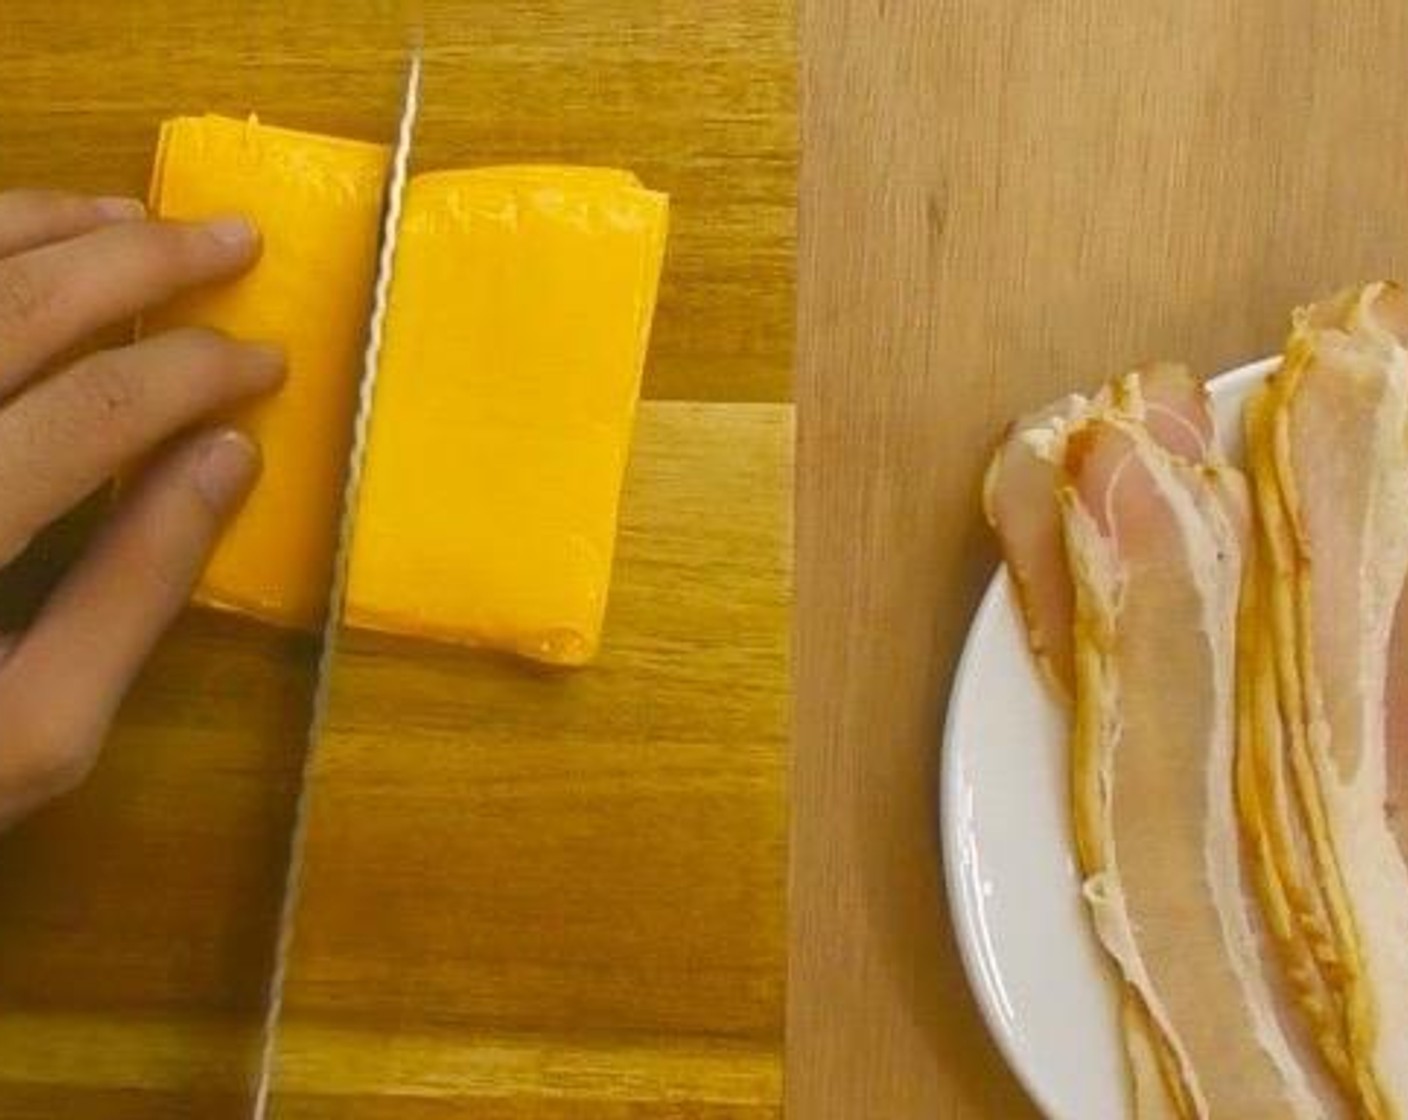 step 4 Next, cut Bacon (6 slices) and Cheddar Cheese (6 slices) into halves.